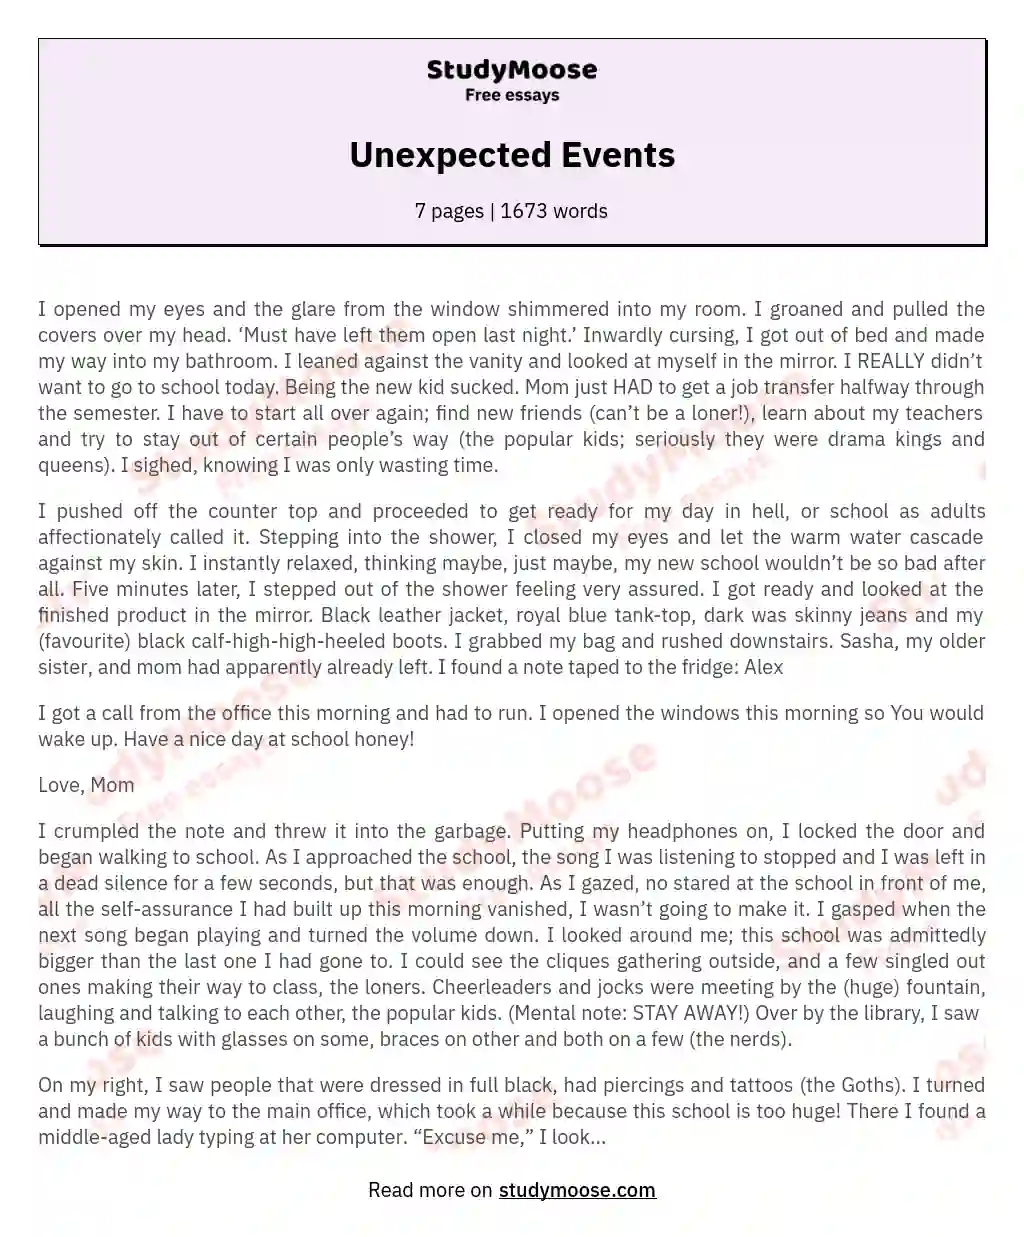 Unexpected Events essay